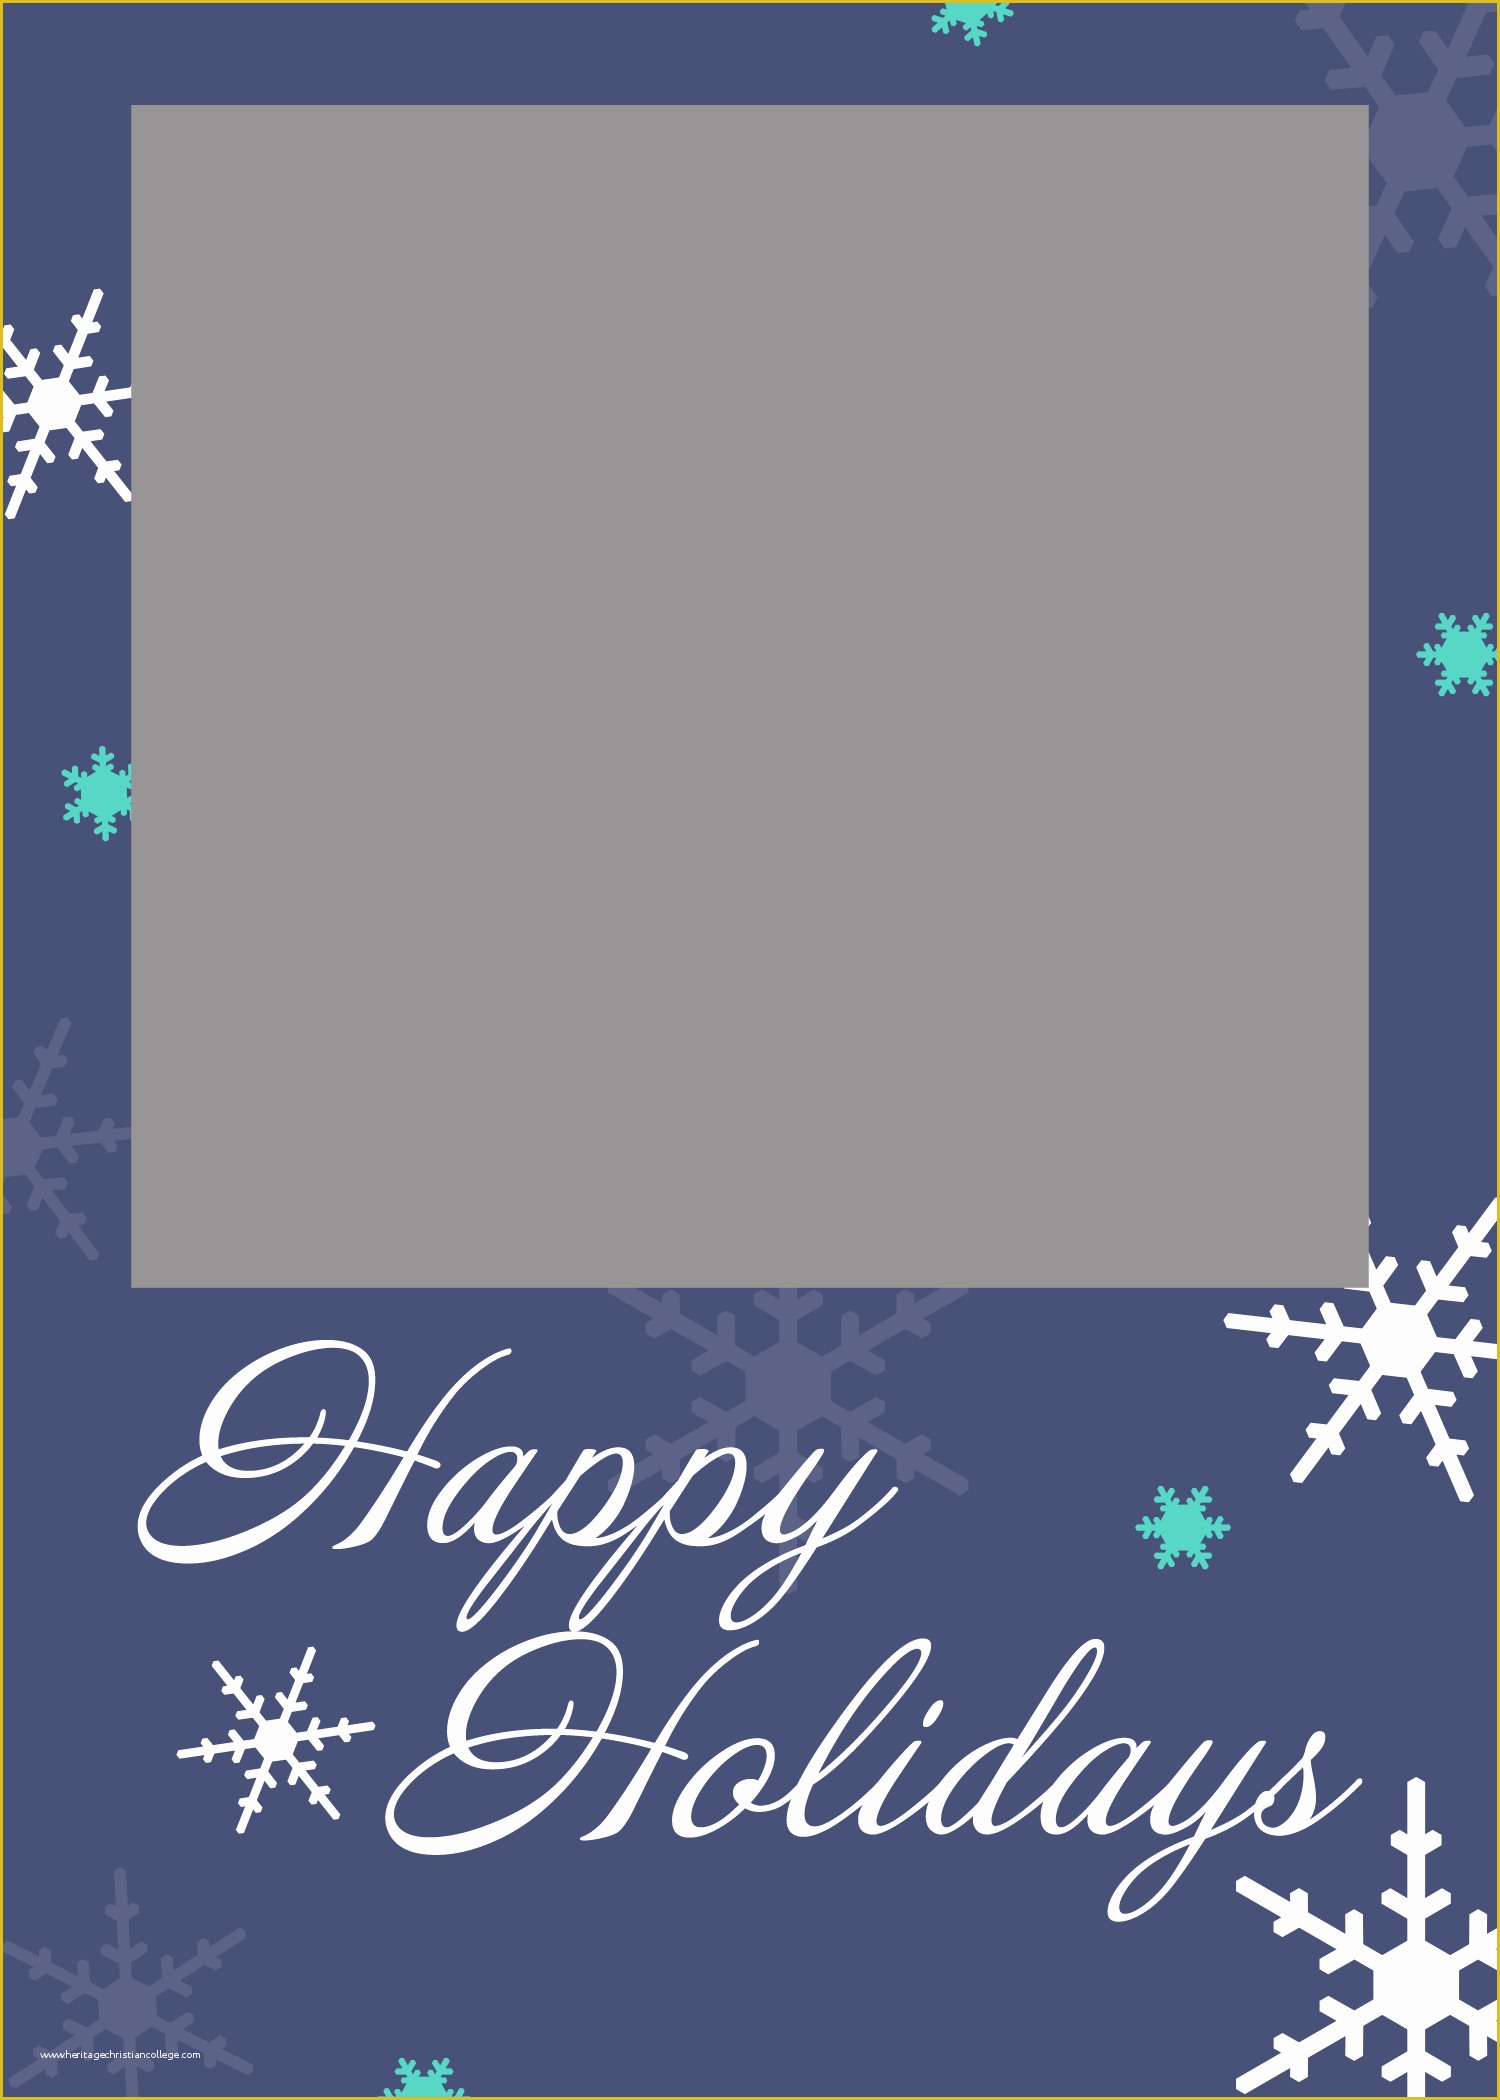 Free Christmas Card Templates for Photographers Of Free Printable Holiday Card Plus Pixlr Video